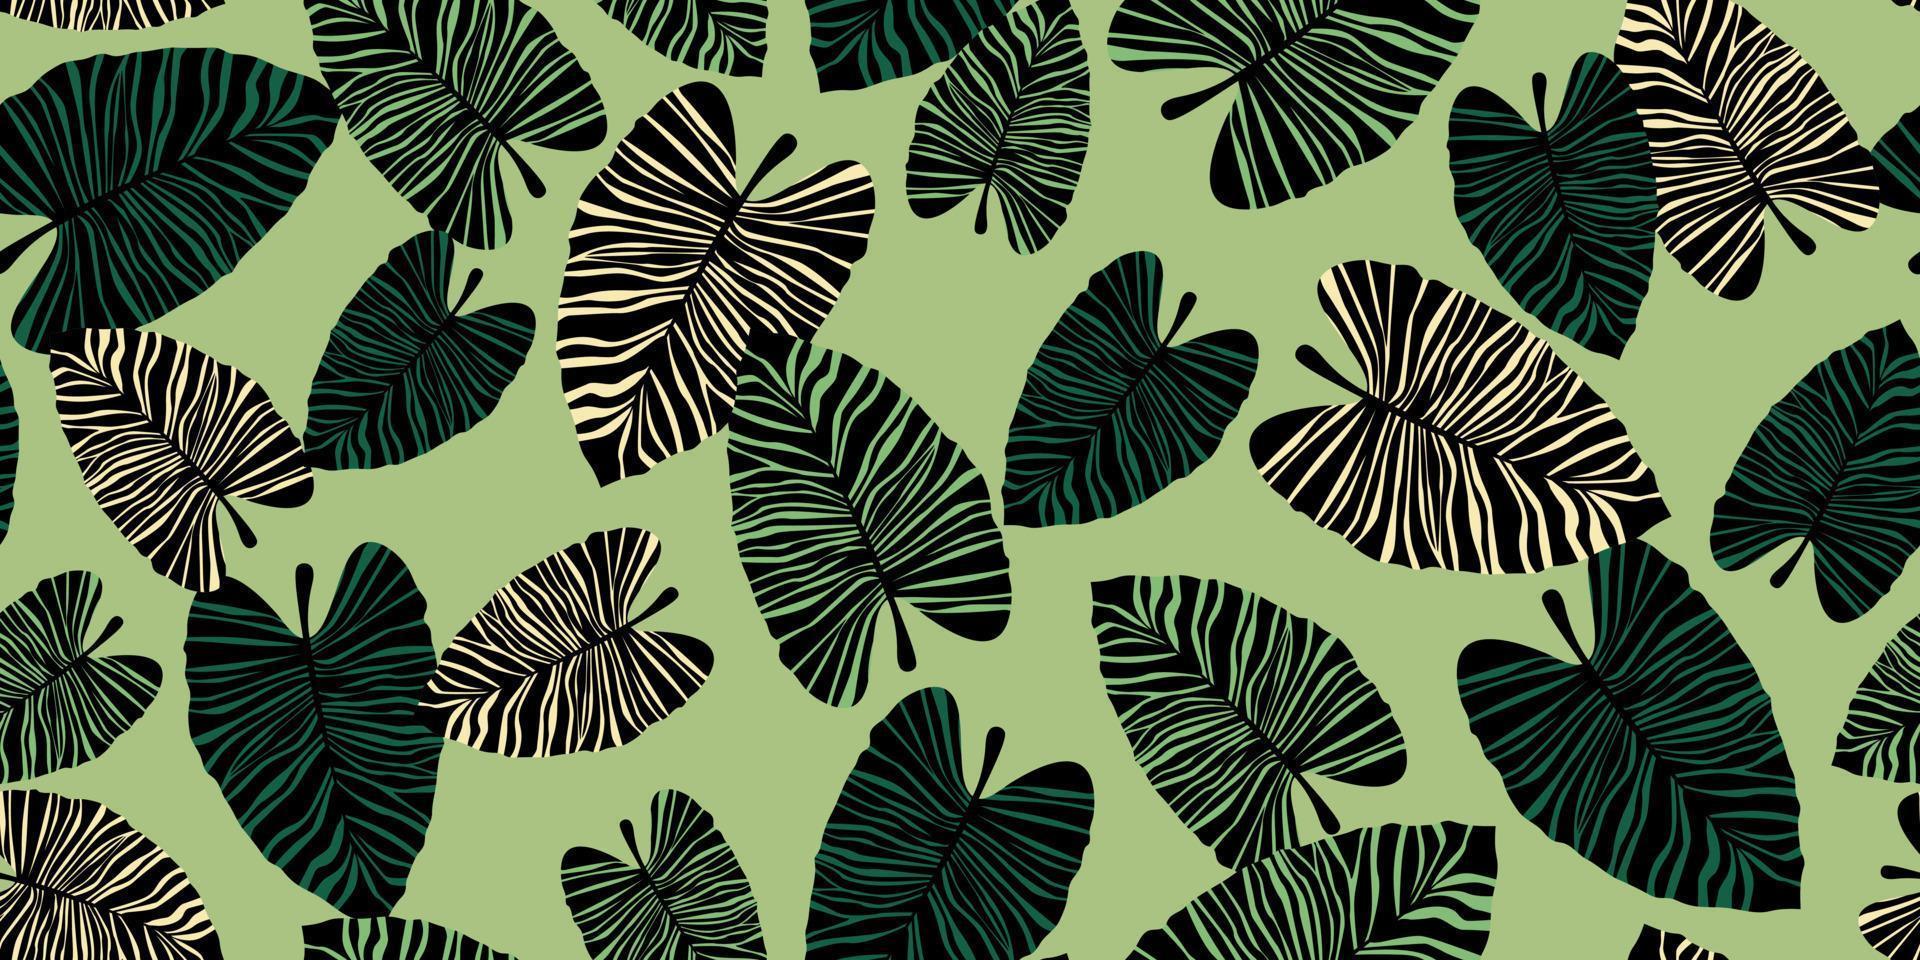 Trendy tropical palm leaves seamless pattern vector